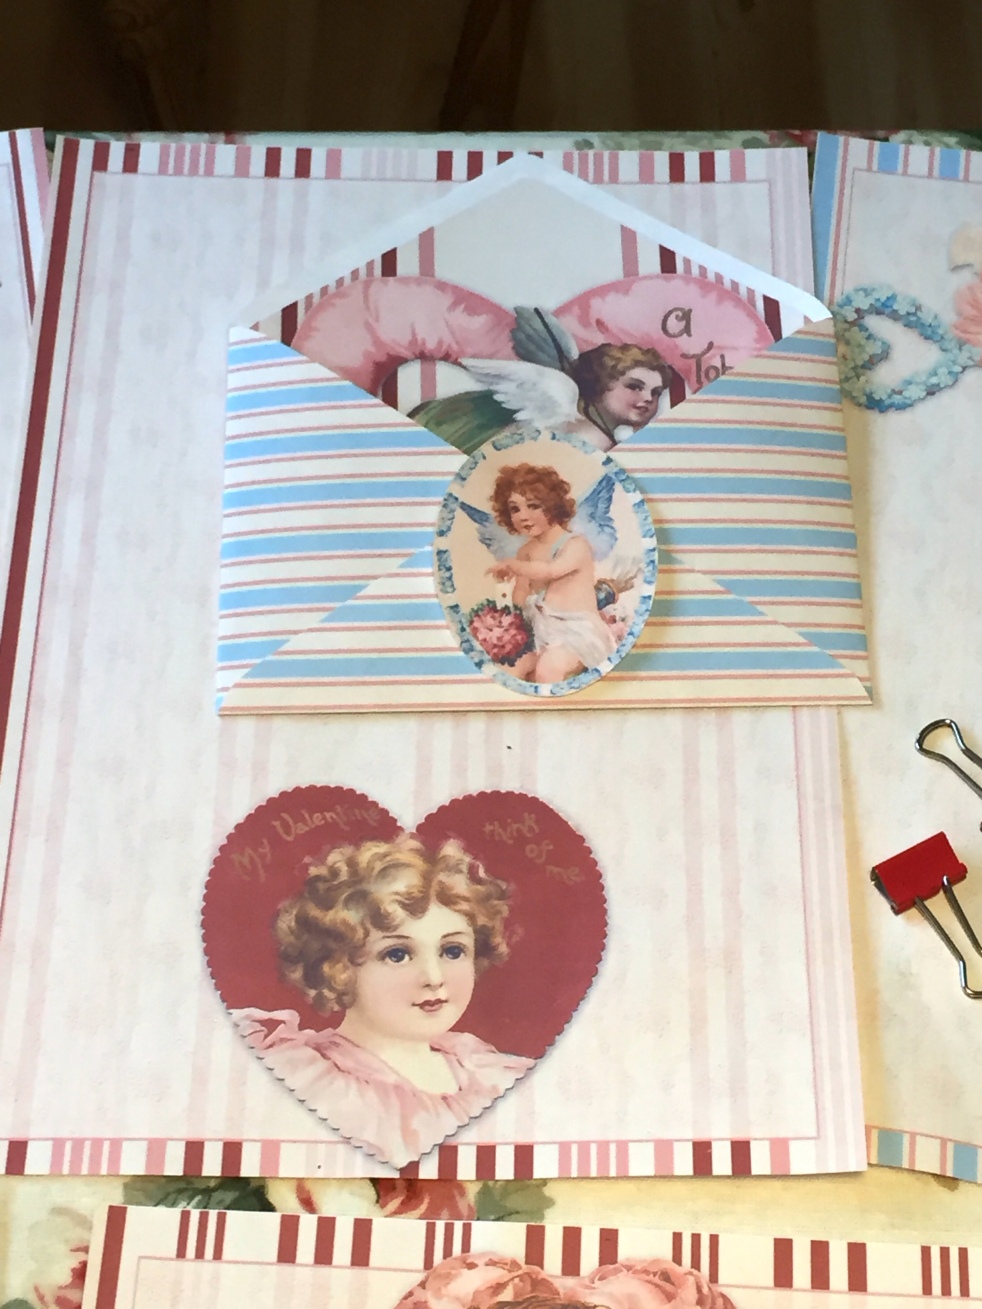 Wings of Whimsy: Valentine Stationery Mix & Match #freebie #vintage #printable #valentine #stationery #cherub #heart #stripes #love #romantic